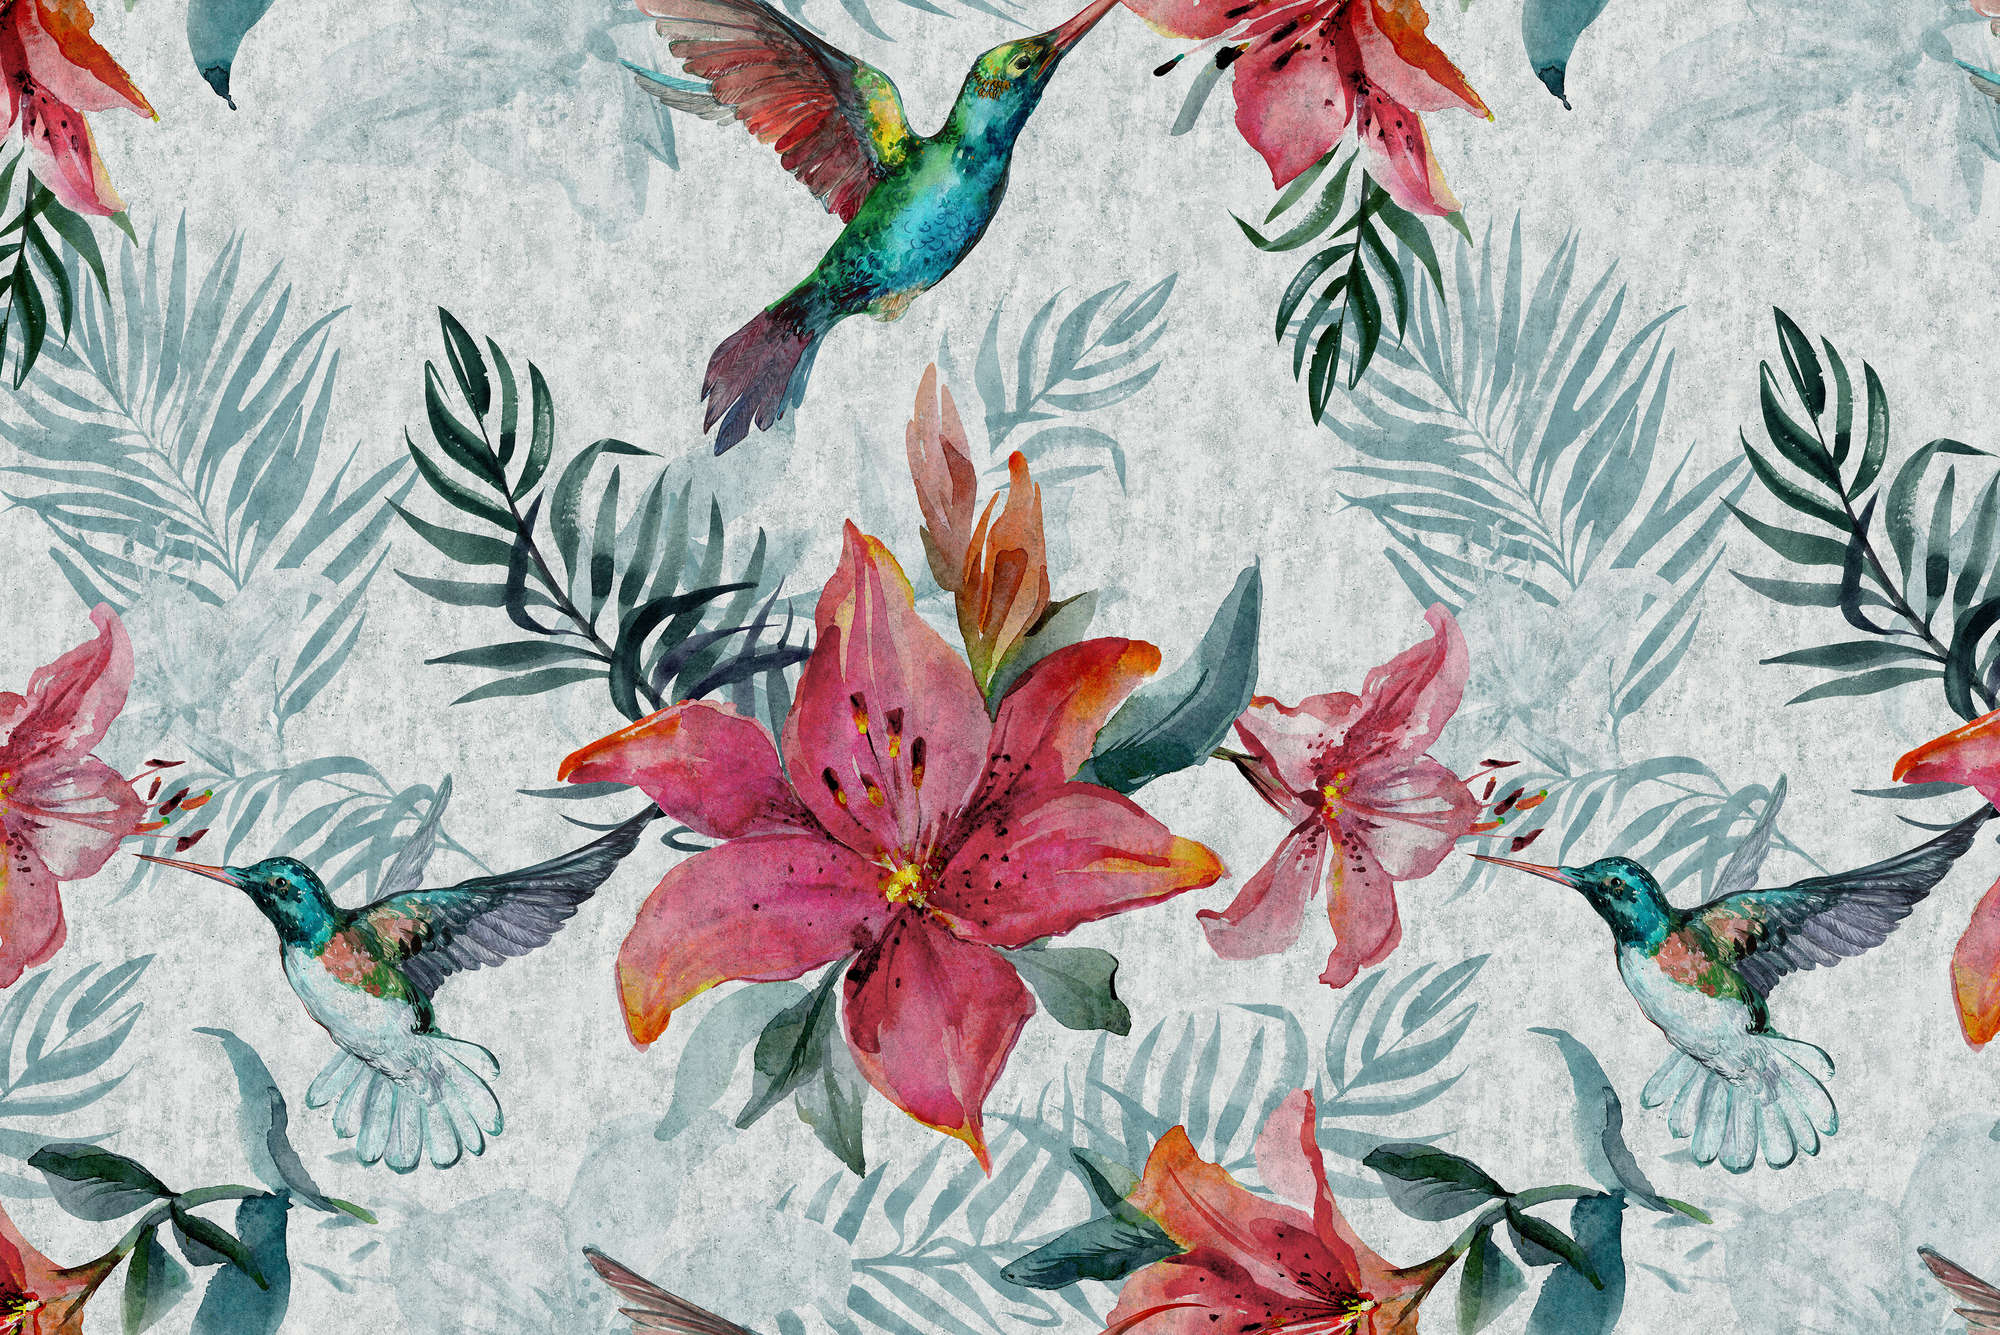             Graphic mural jungle flowers with birds on textured nonwoven
        